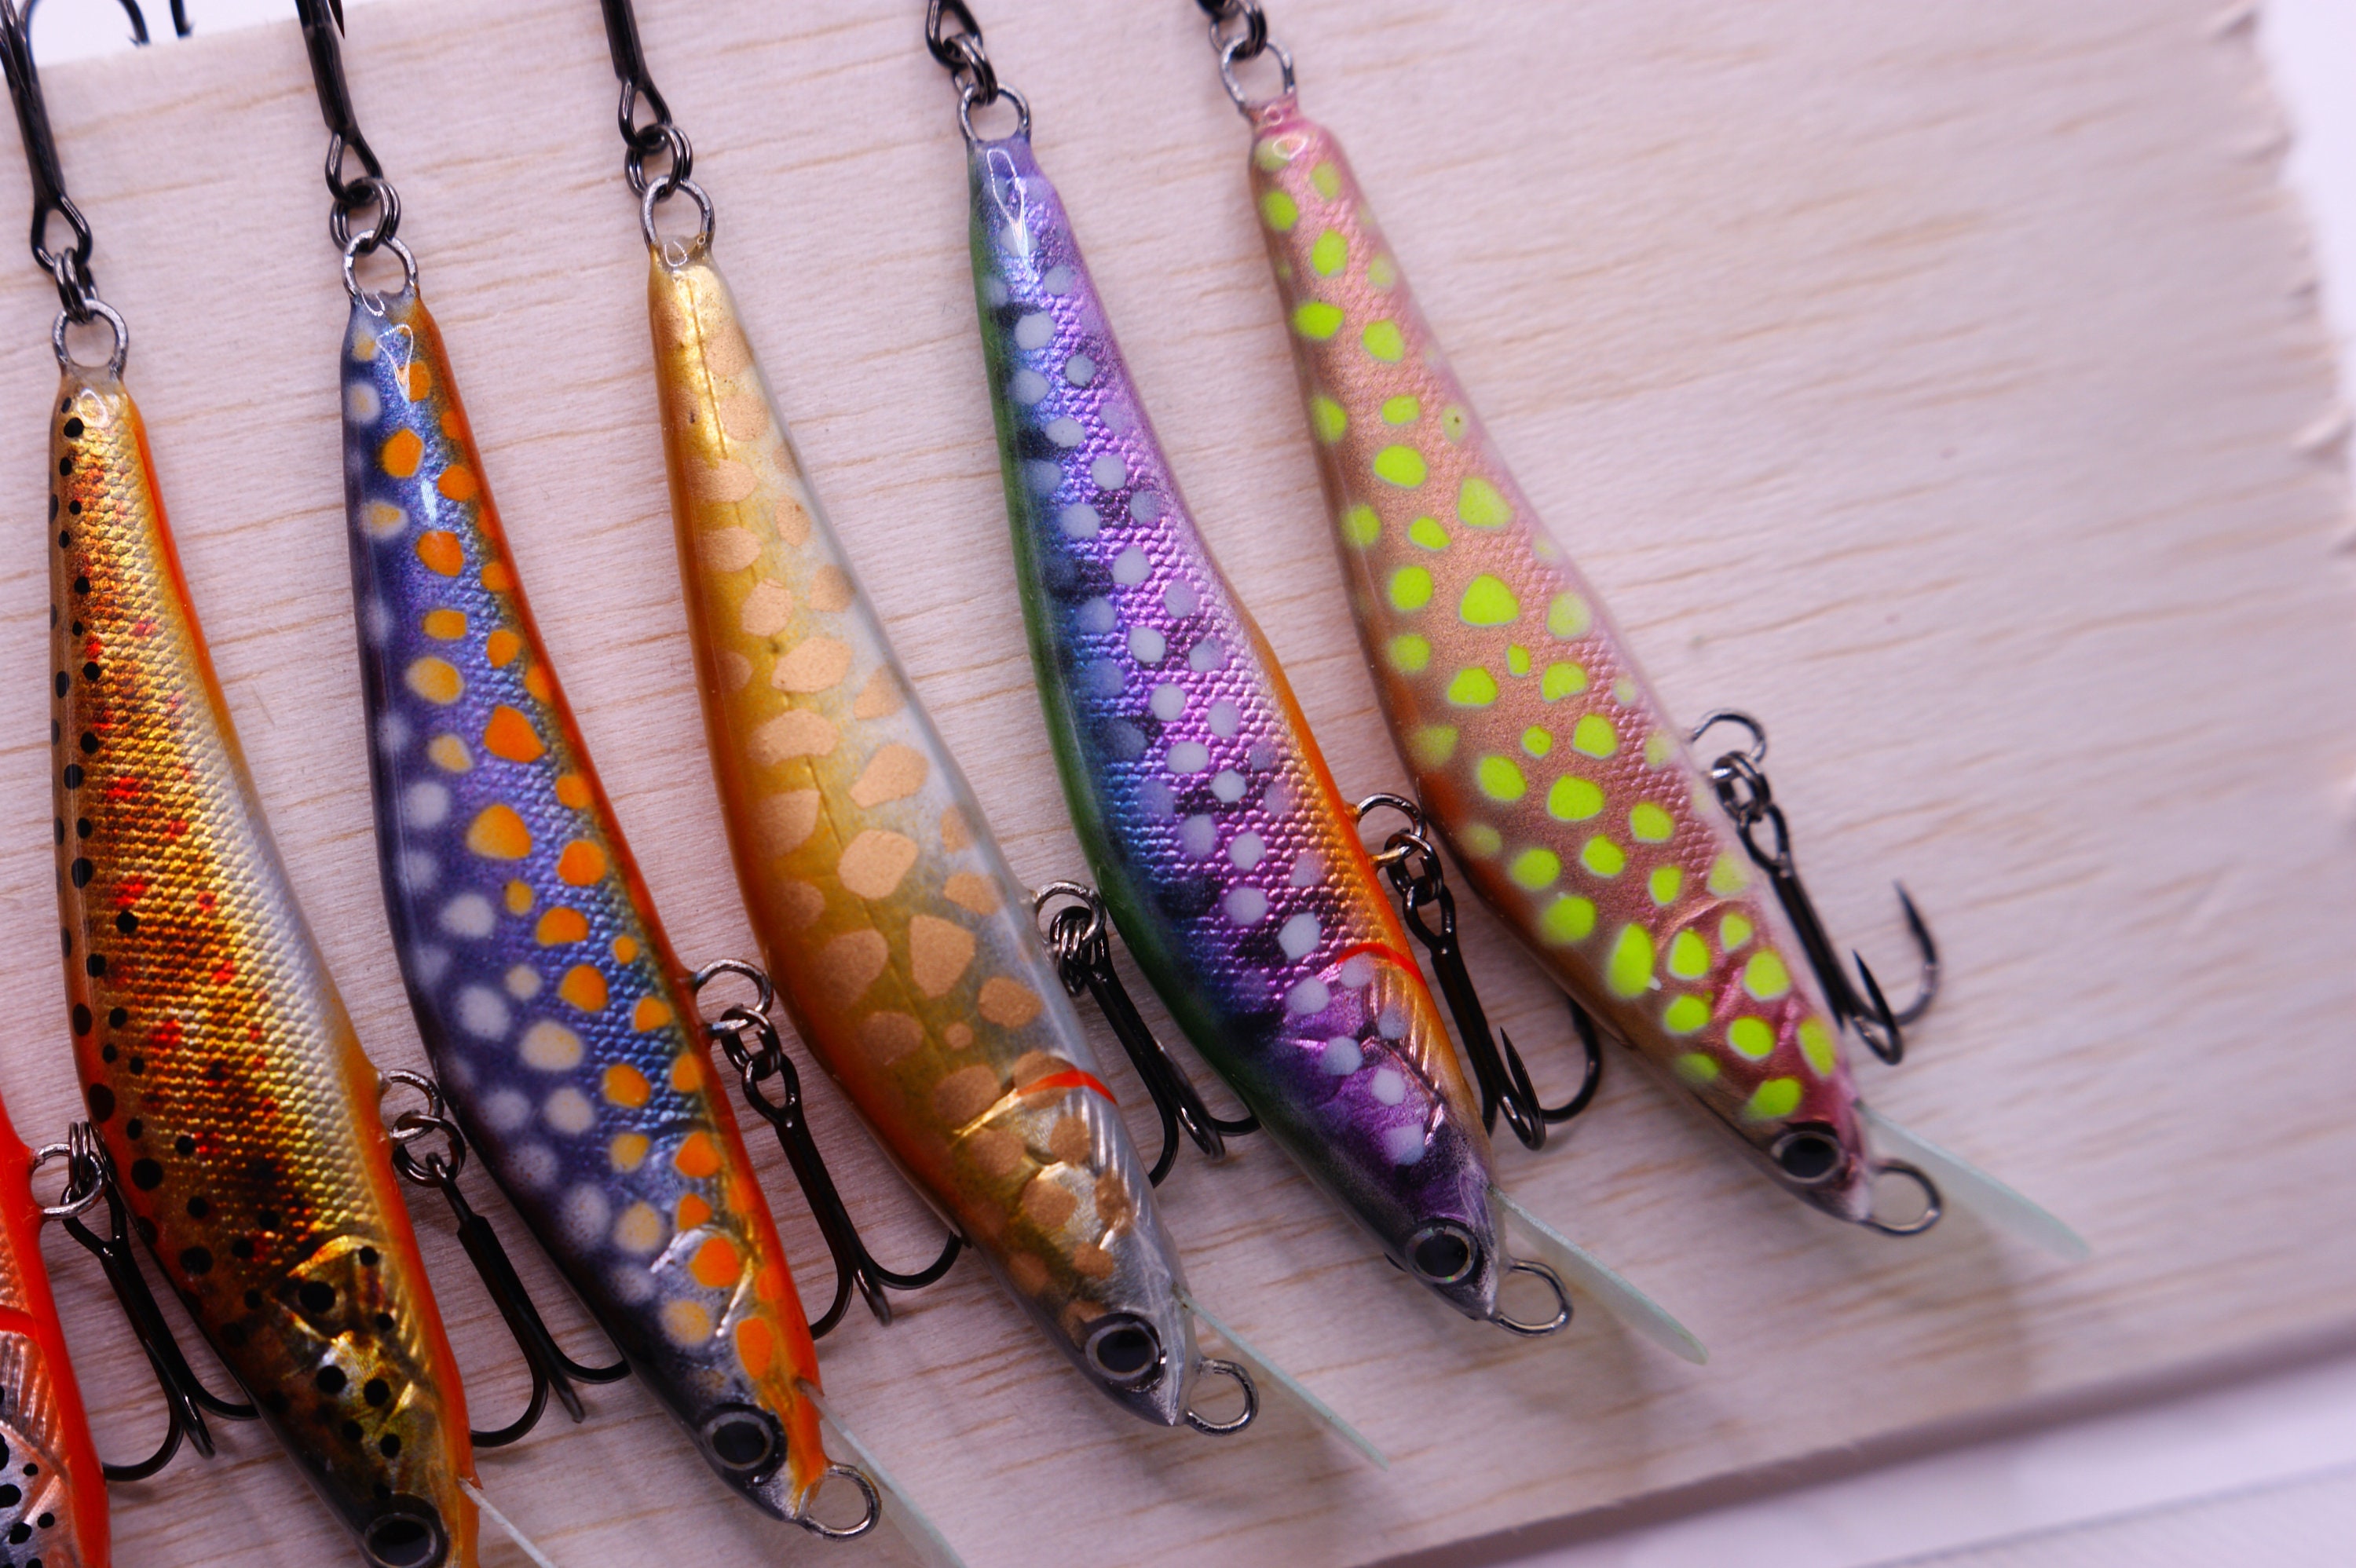 BF Lures Handcrafted Tasmanian Timber Lures – Trophy Trout Lures and Fly  Fishing